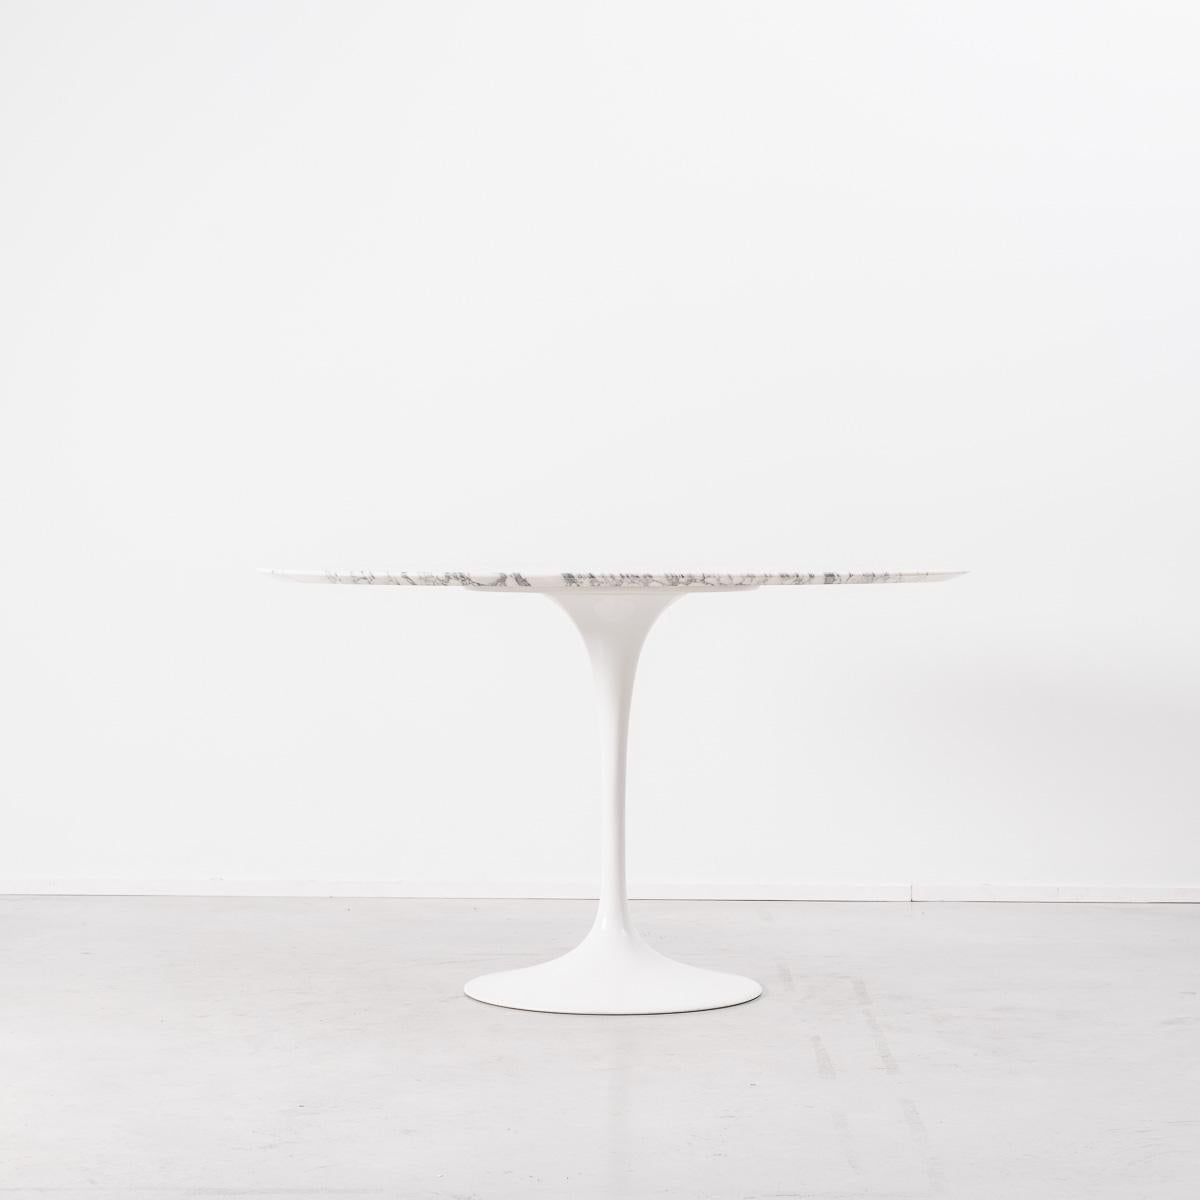 The tulip table is a true classic by Finnish-American architect Eero Saarinen for American manufacturer Knoll. Saarinen’s constant pushing of form and material lead to the creation of some of the most important advances in both architecture and